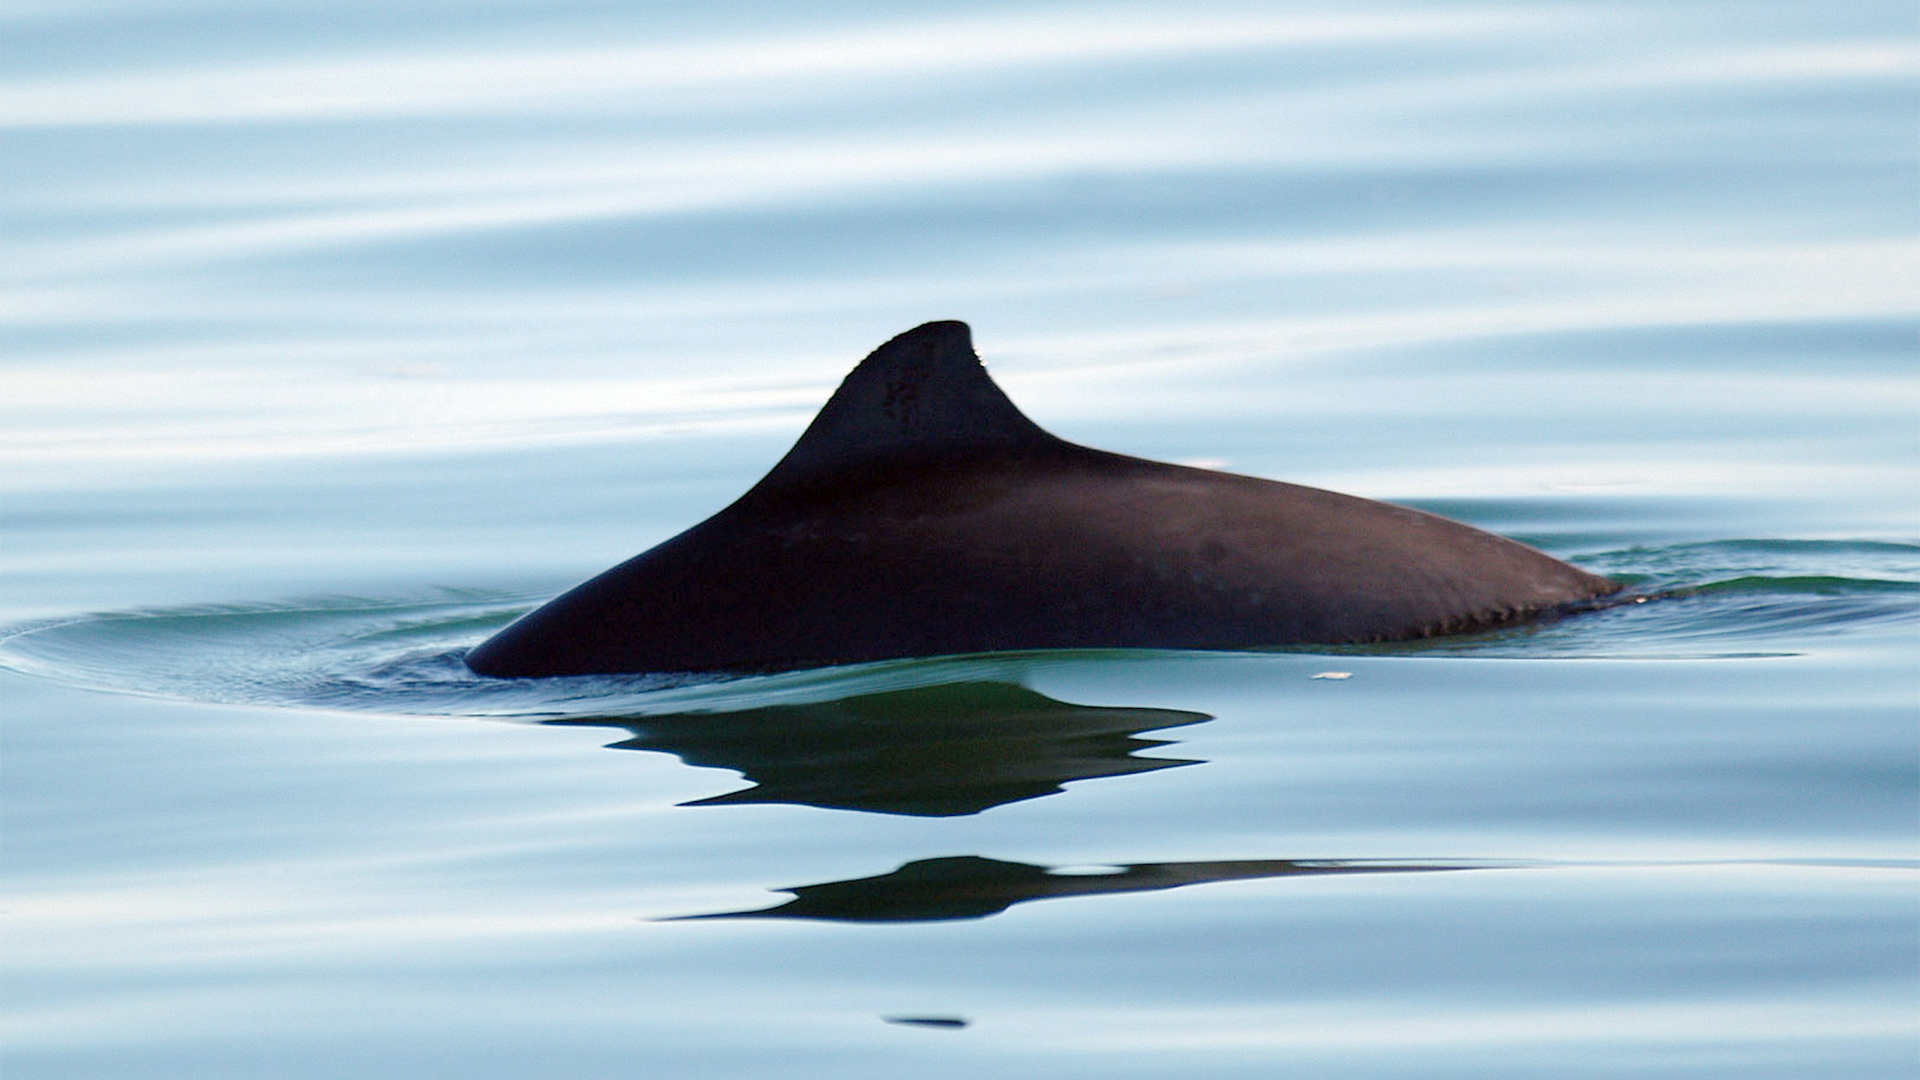 The back of a porpoise with its triangular dorsal fin.